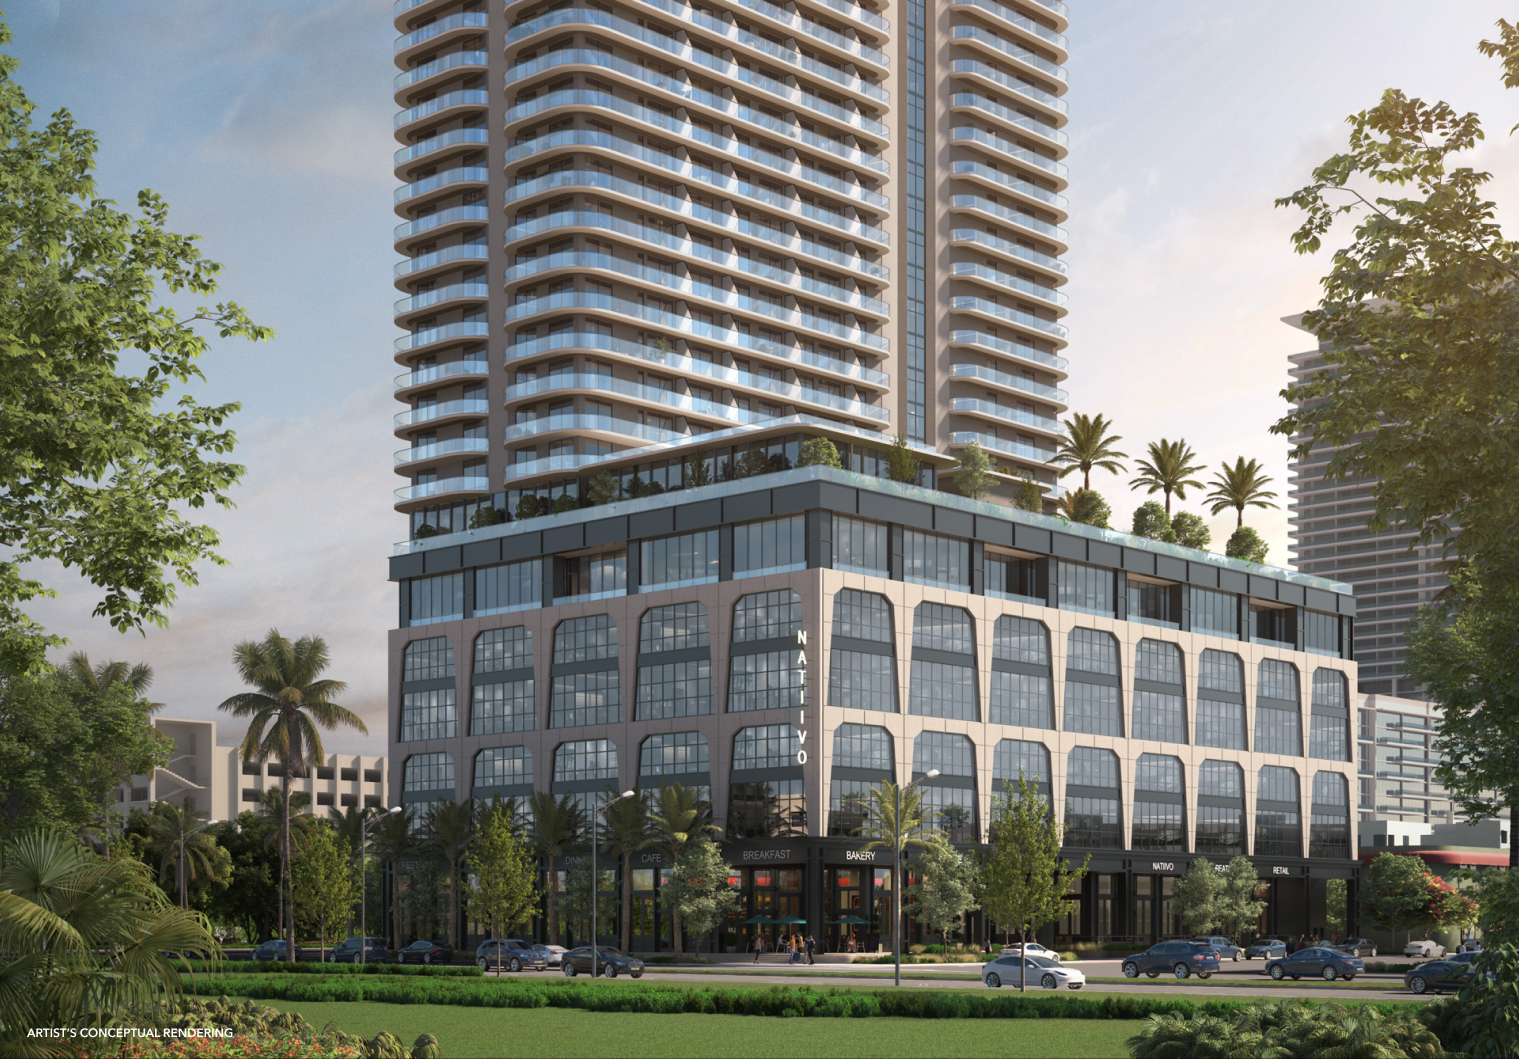 Artist's rendering of Natiivo Fort Lauderdale: new condos for sale